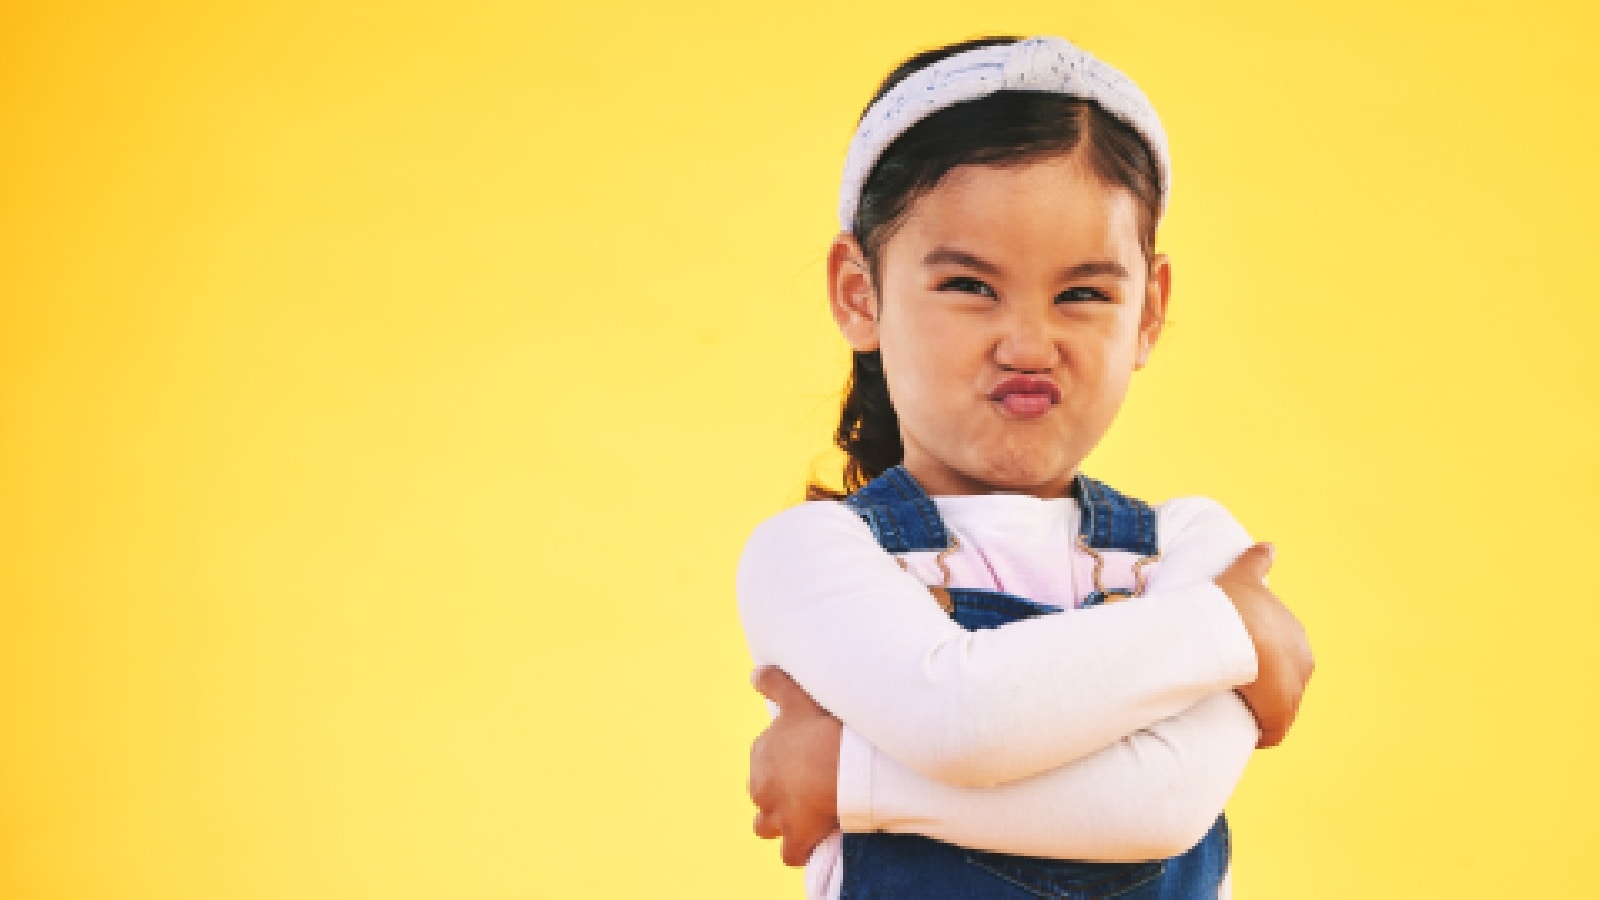 Temper tantrums in kids: 5 ways to deal with them